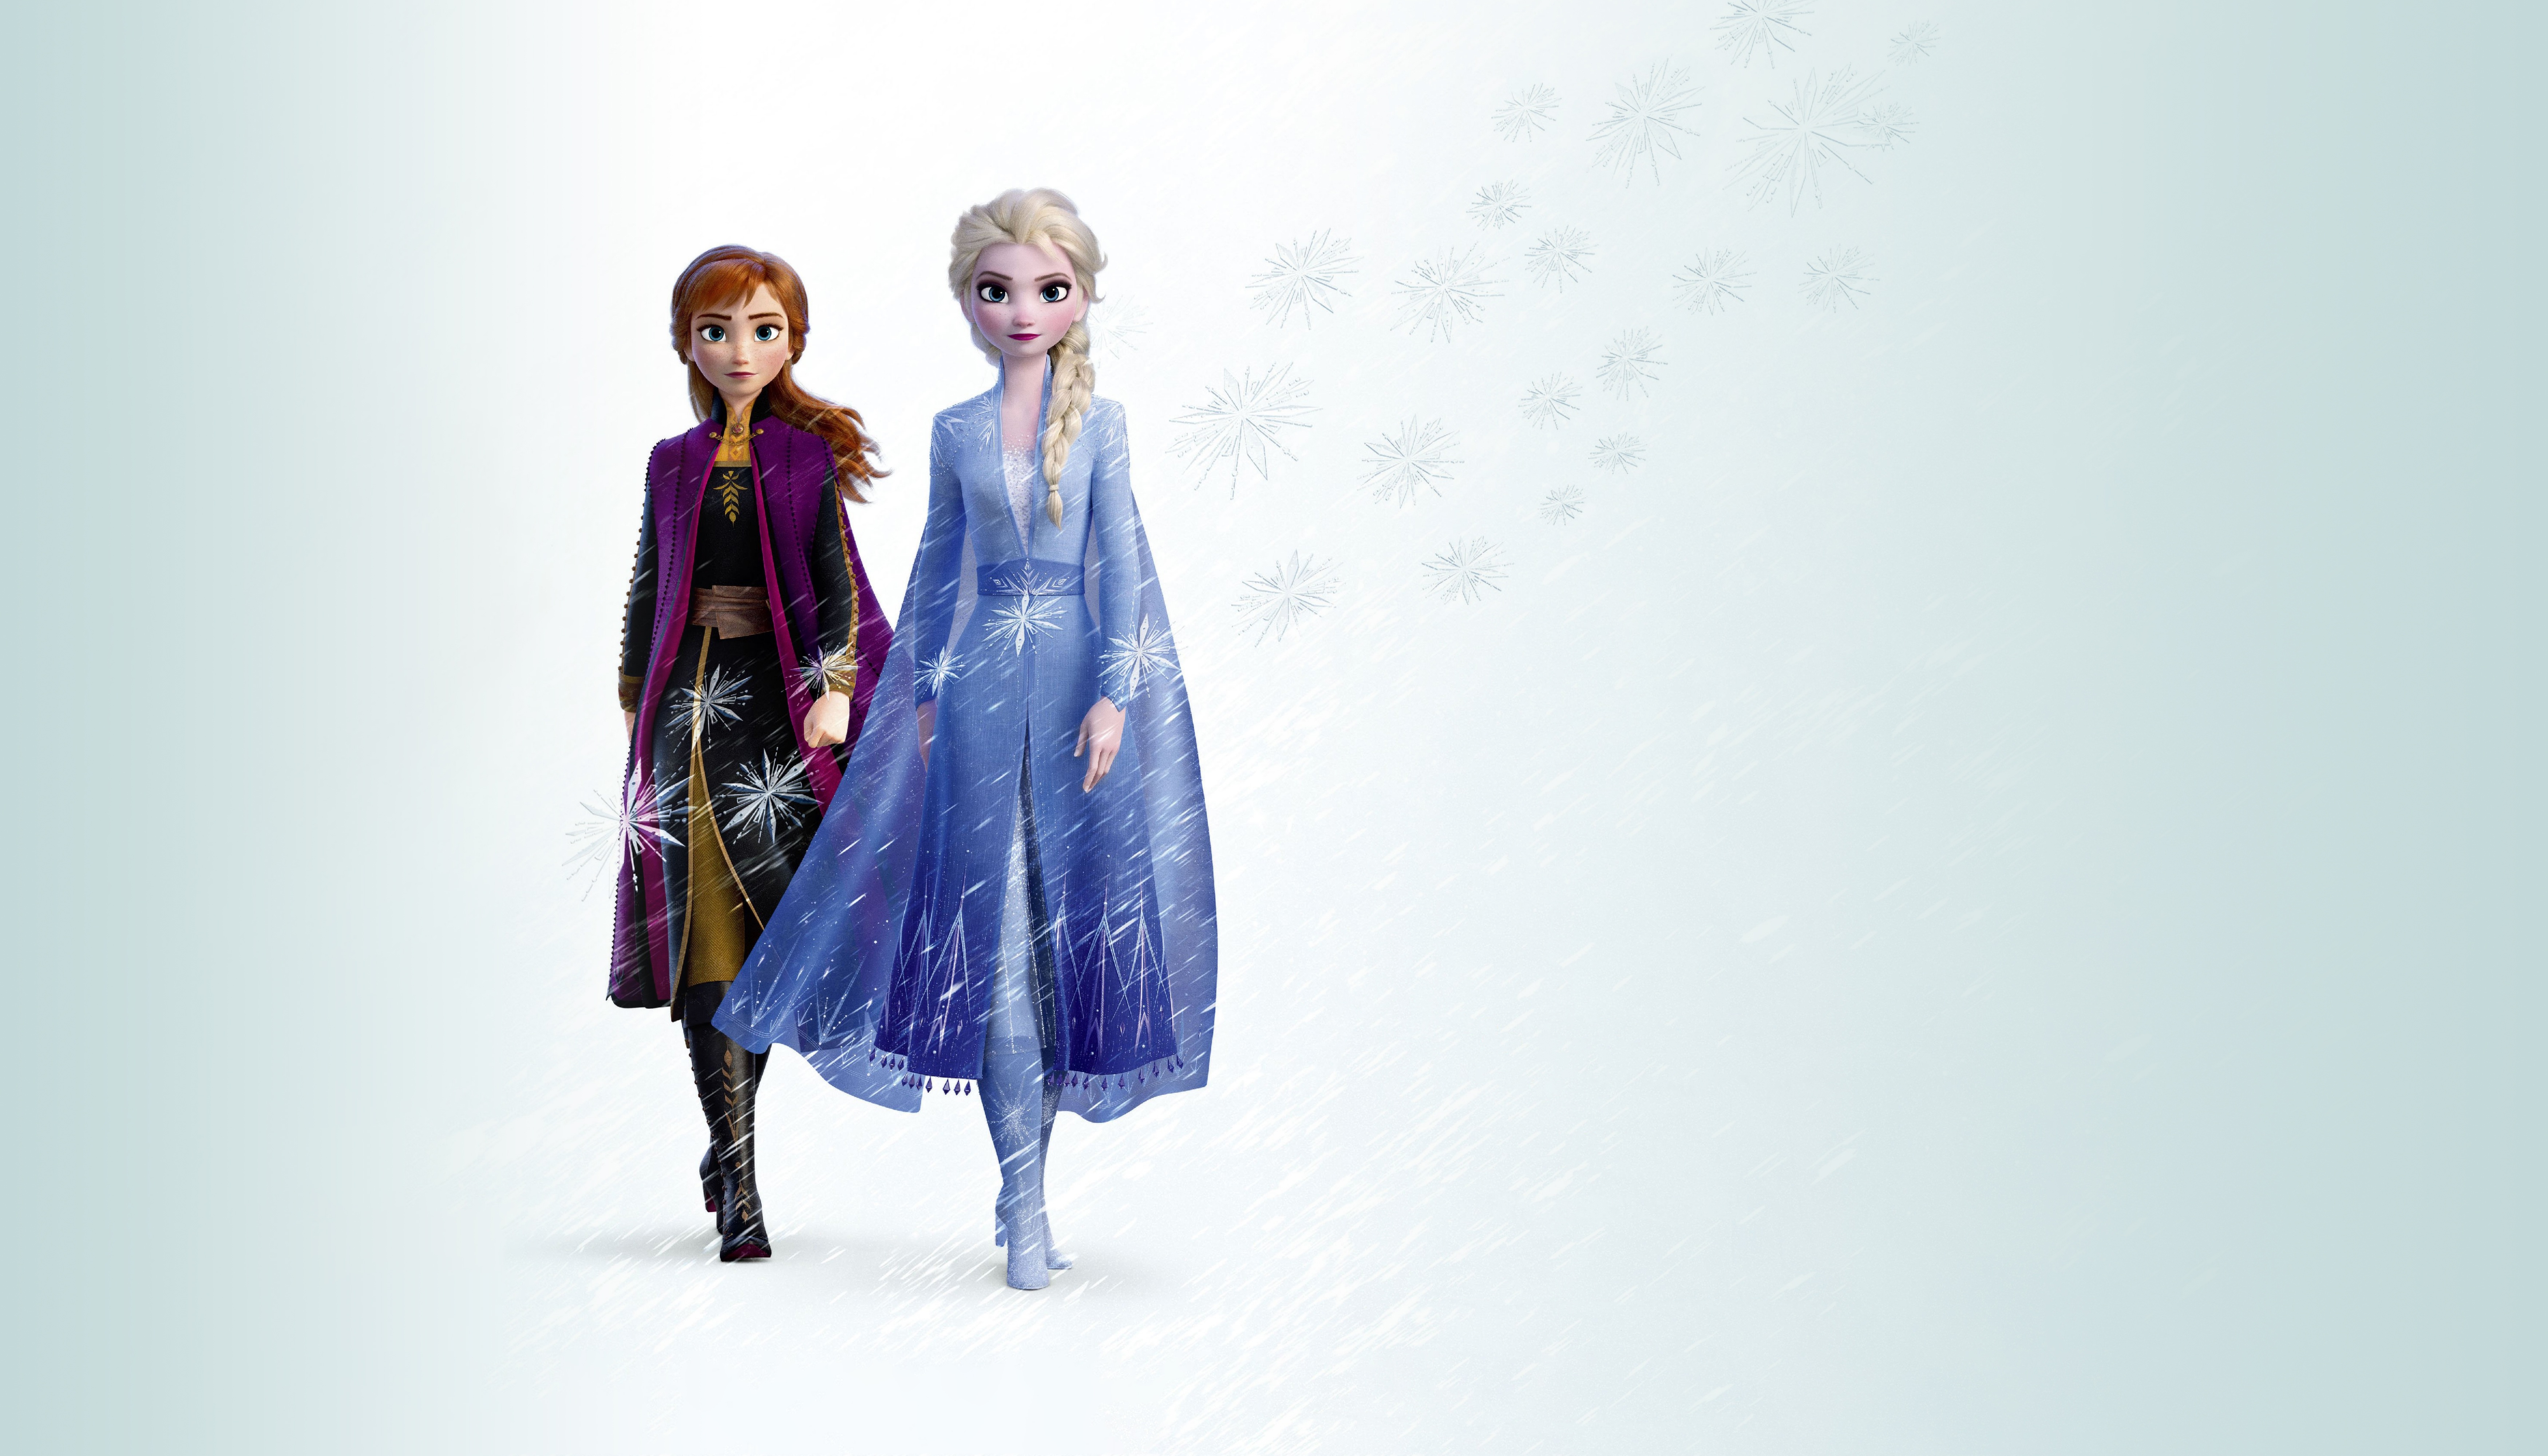 70+ Frozen 2 HD Wallpapers and Backgrounds